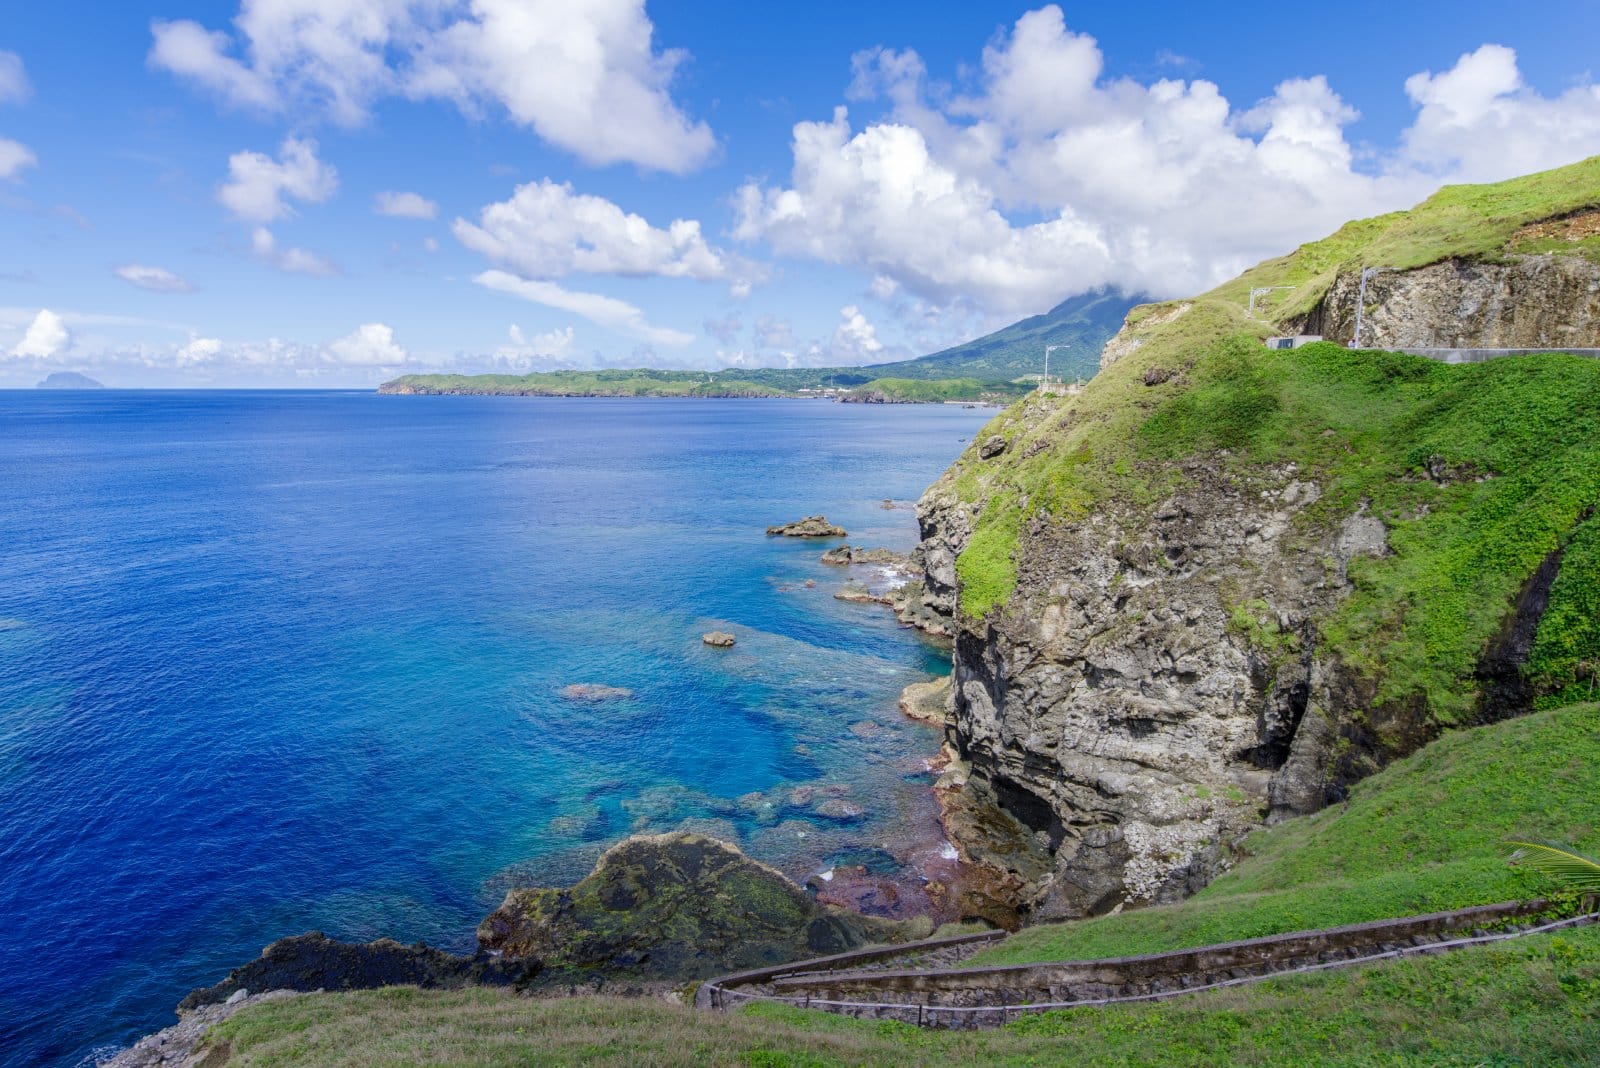 <p class="wp-caption-text">Image Credit: Shutterstock / Kim David</p>  <p><span>Batanes, the northernmost province of the Philippines, is a breathtaking archipelago known for its rugged terrain, traditional Ivatan stone houses, and the Pacific Ocean’s vast expanse. Its remote location contributes to its preserved beauty and culture, offering a tranquil escape from the hustle and bustle of city life. Attractions include the rolling hills of Batan Island, the lighthouses dotting the landscape, and the prehistoric settlement in the UNESCO-listed site of Valugan Boulder Beach.</span></p>